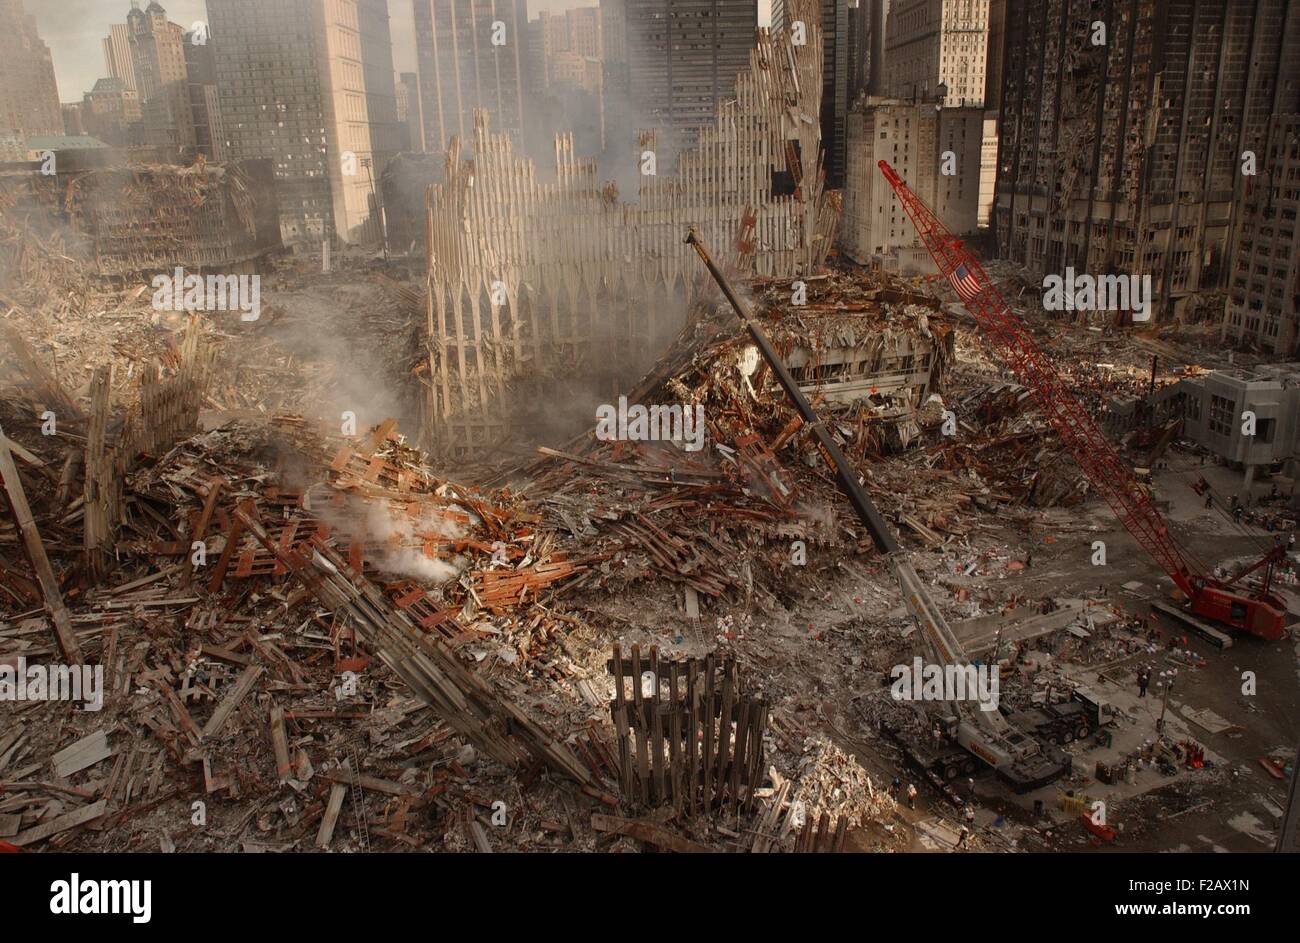 Wide view of recovery operations at the World Trade Center, New York City, Sept 17, 2001. In the center is the pile and remains Stock Photo